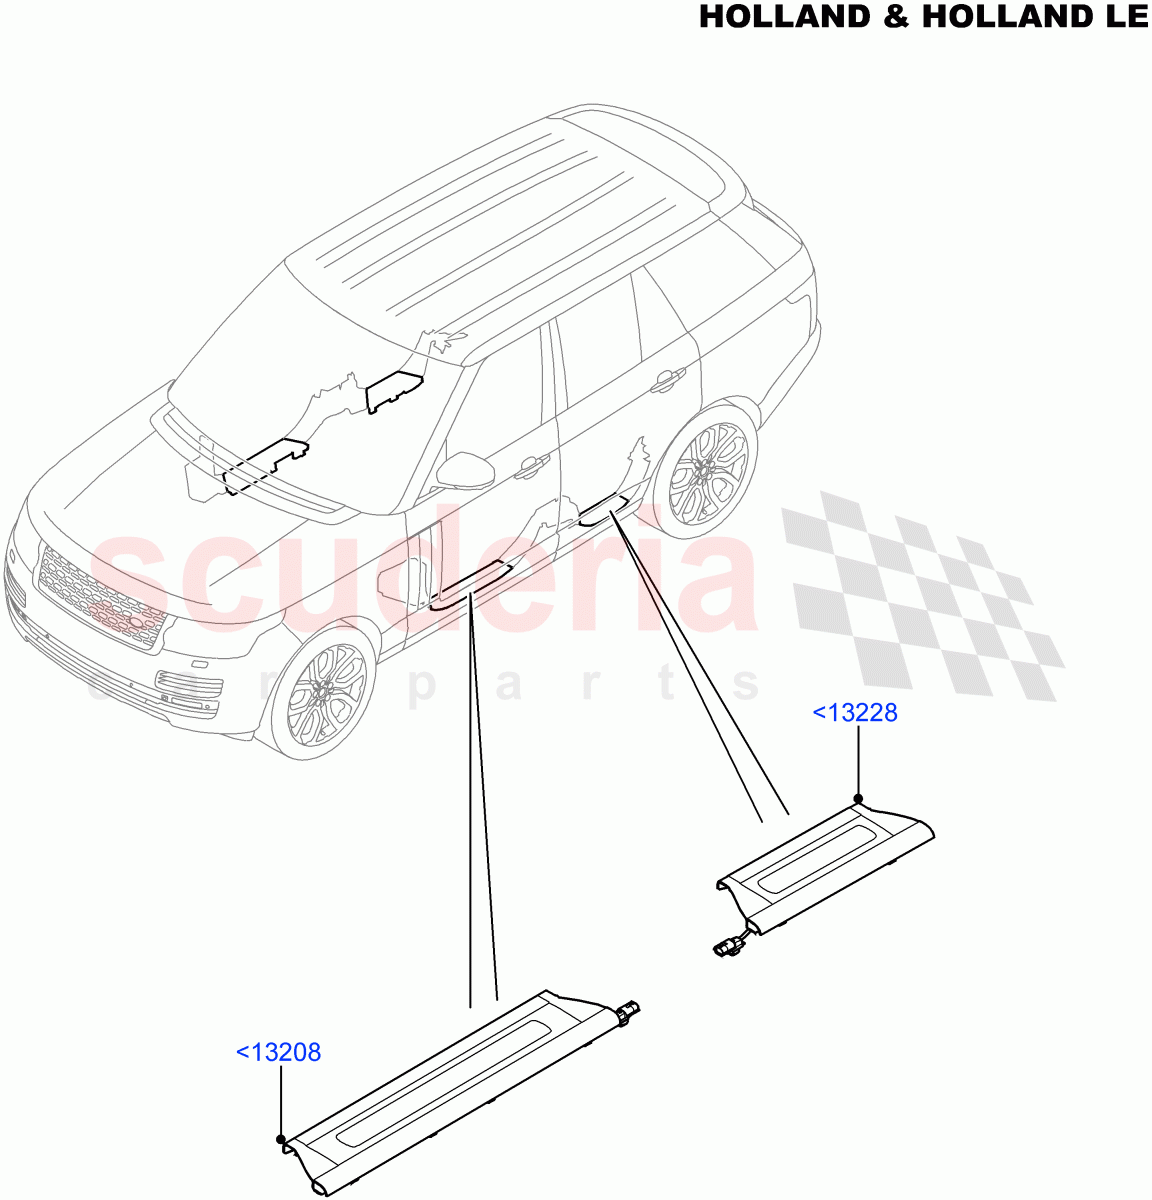 Side Trim(Holland & Holland LE, Sill)(Console Deployable Tables)((V)FROMFA000001) of Land Rover Land Rover Range Rover (2012-2021) [5.0 OHC SGDI NA V8 Petrol]